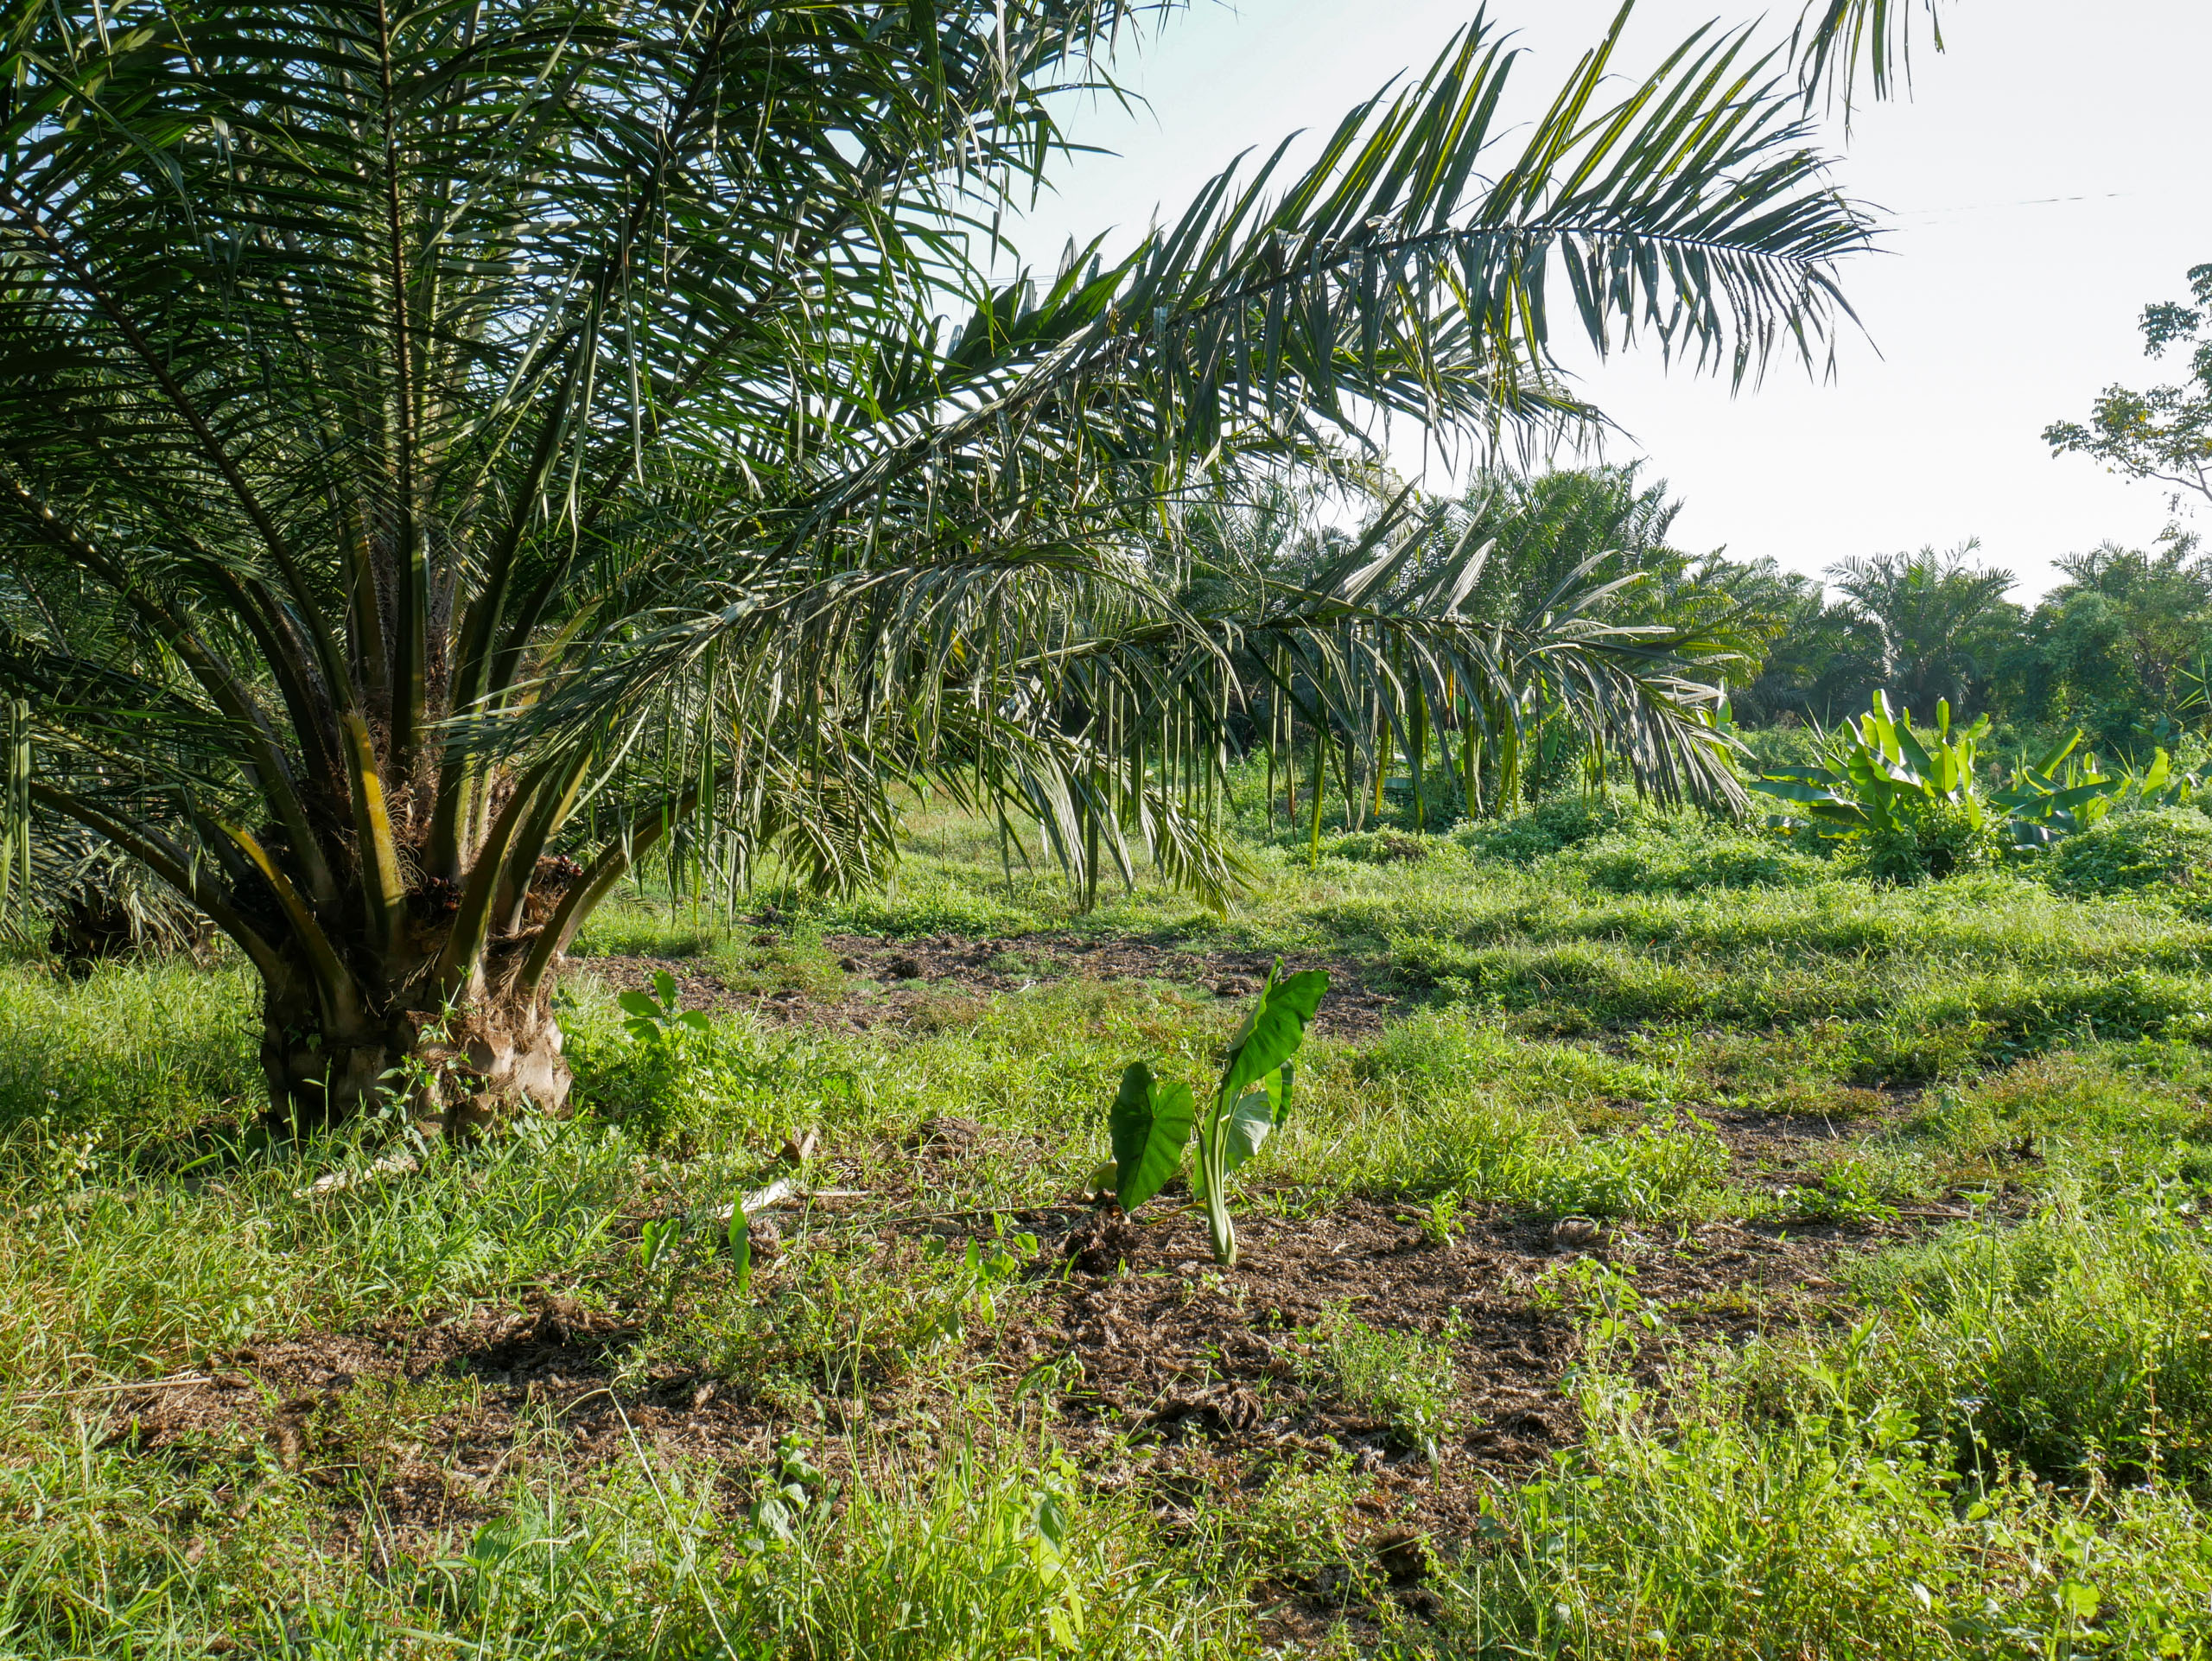  crops were grown between the palms when they were small